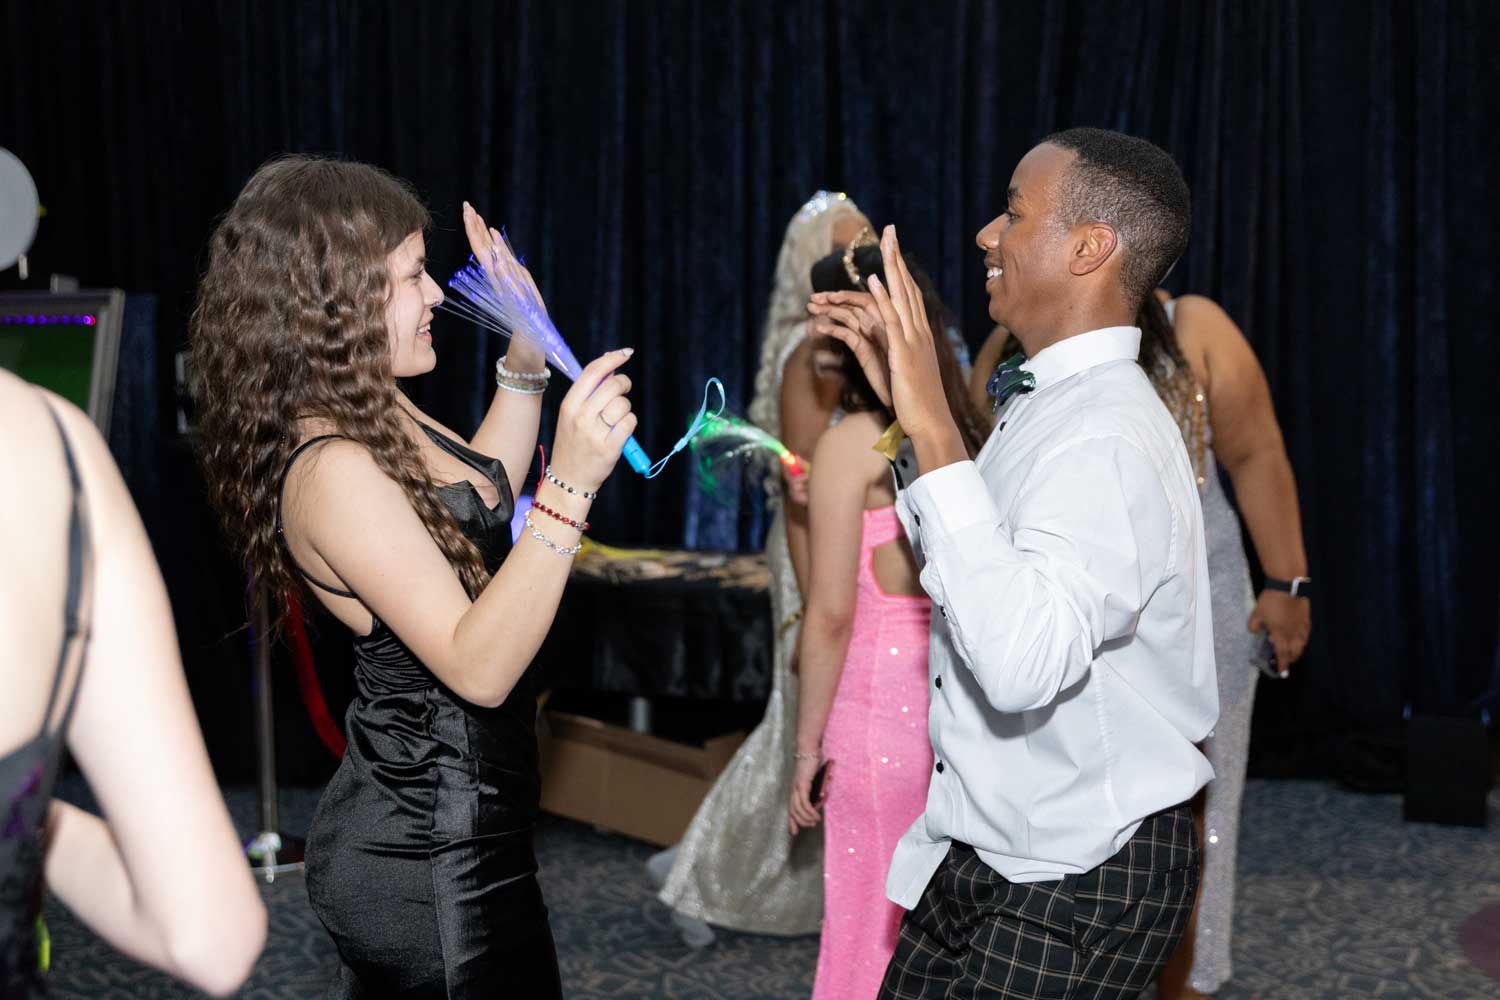 Teens dance happily at the U C S F Benioff Children's Hospital Oakland's prom event.